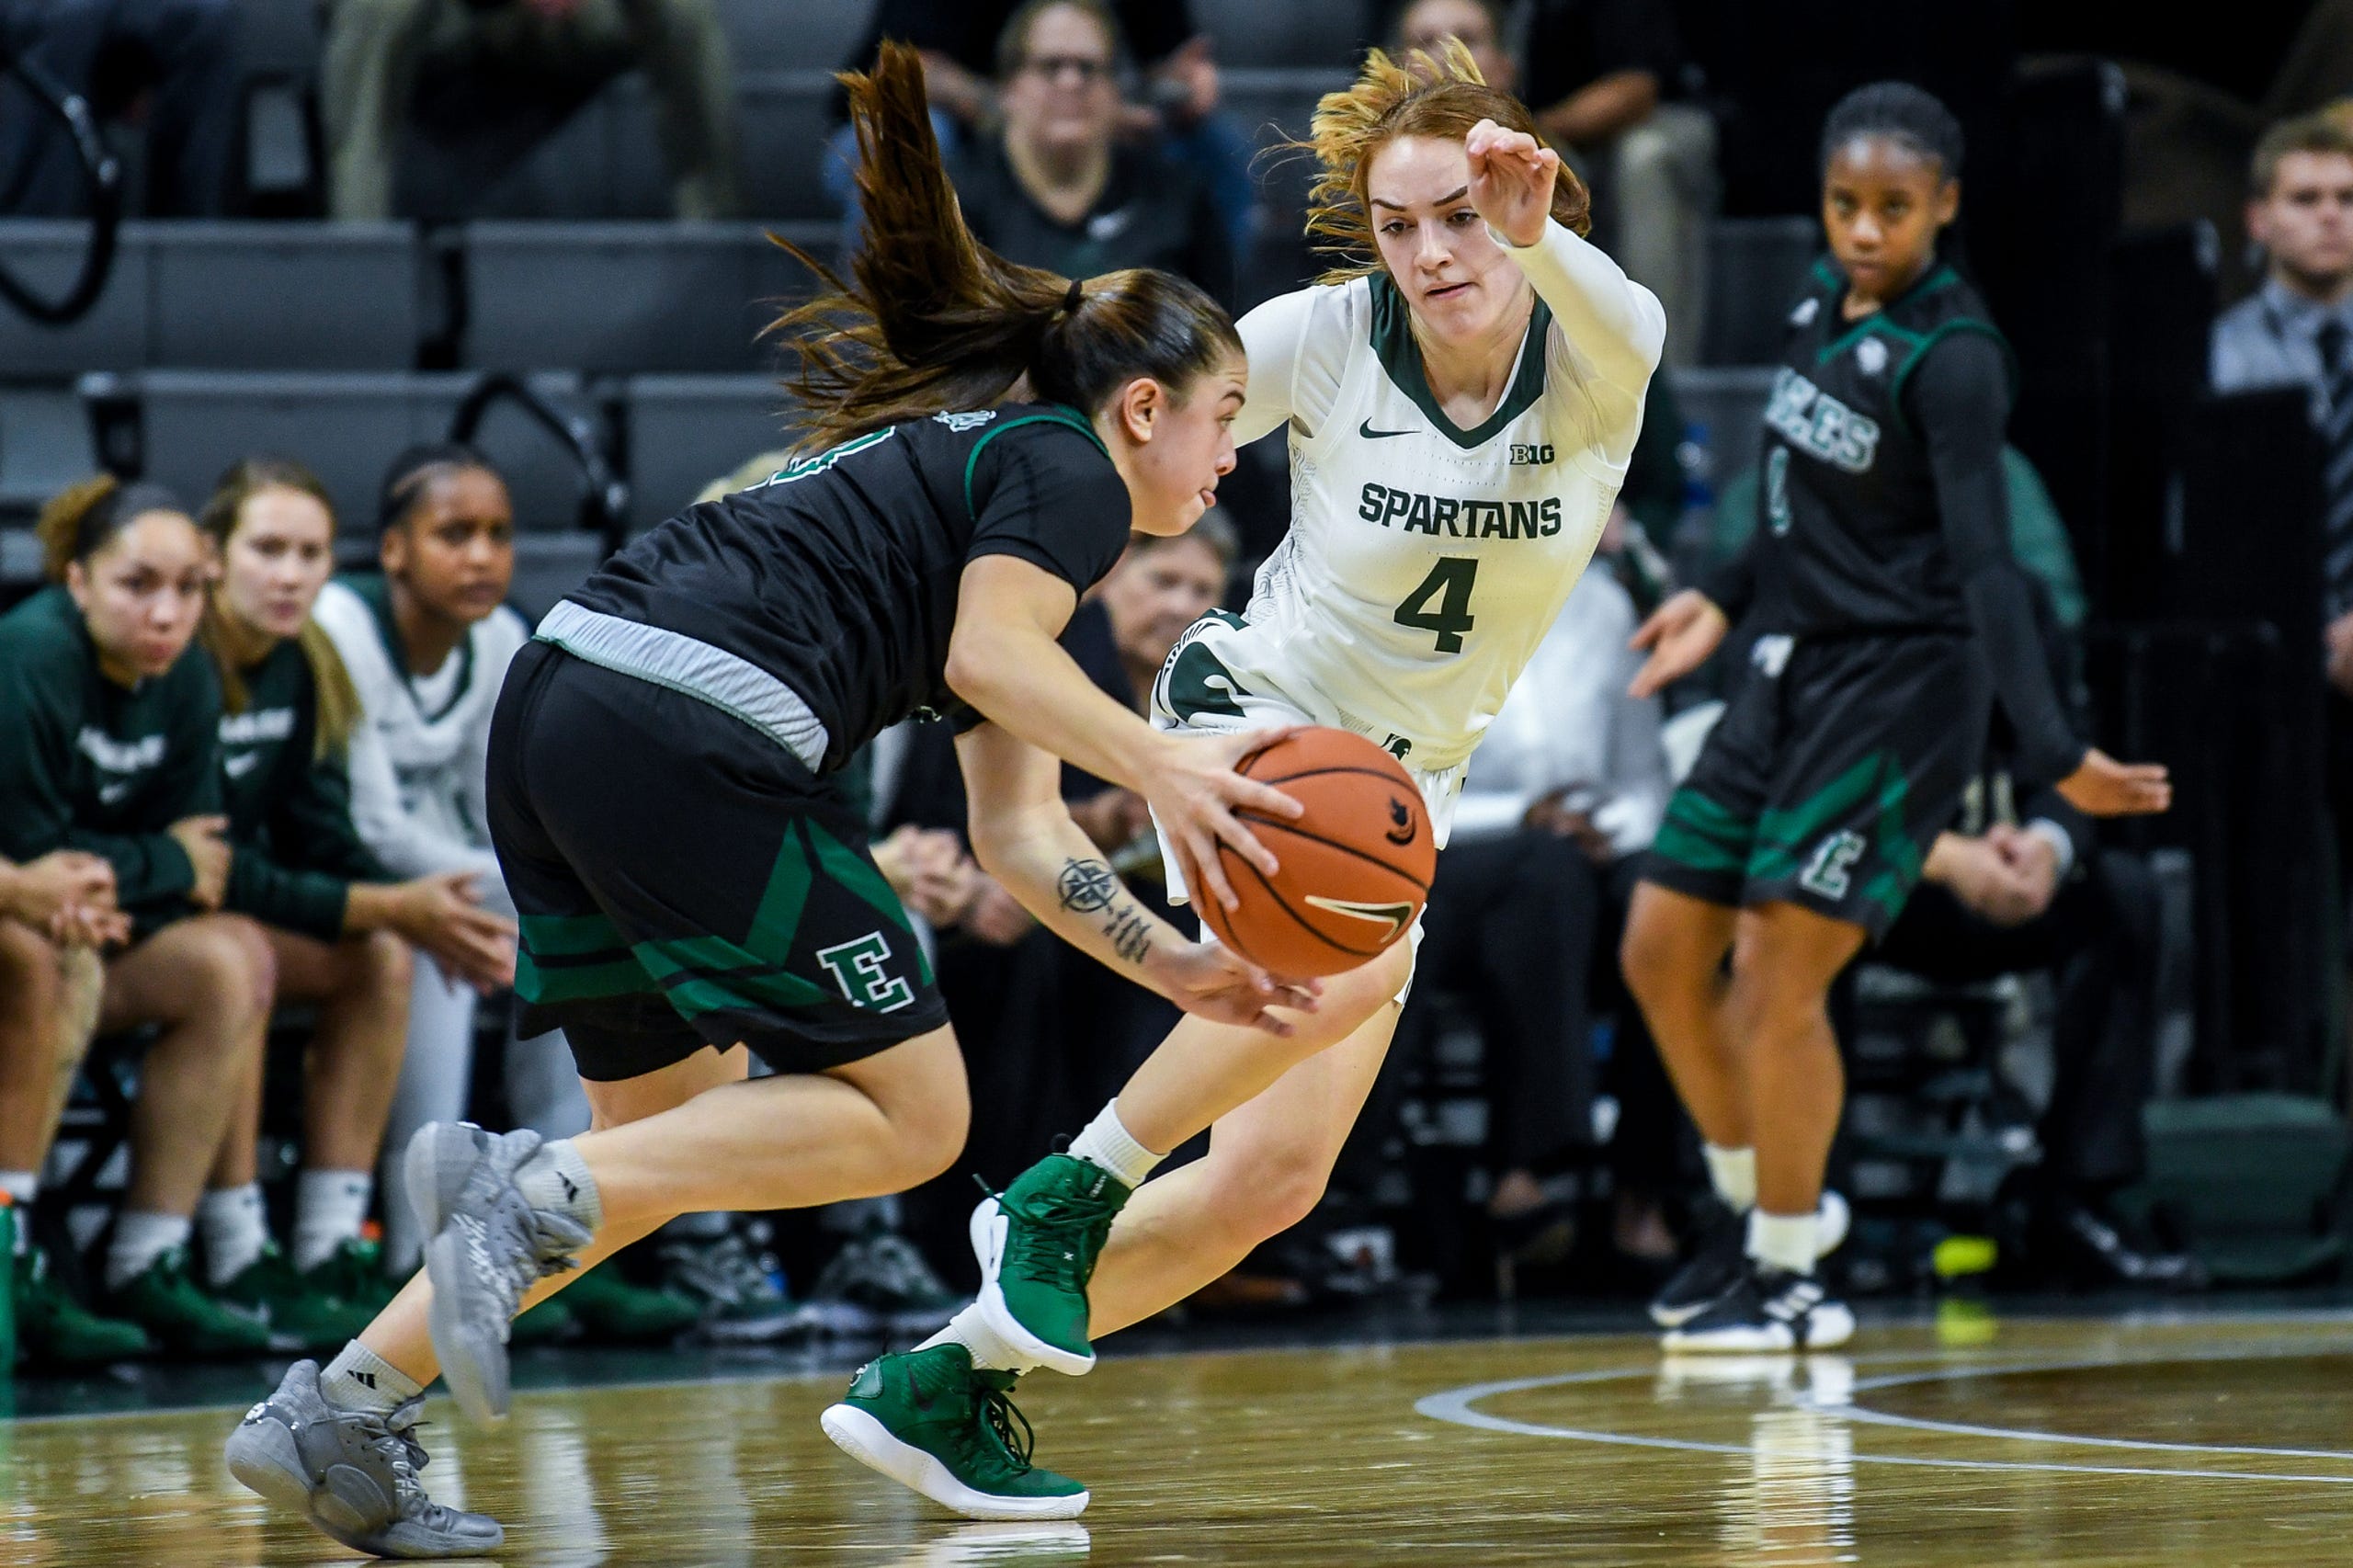 Michigan State's Taryn McCutcheon, right, guards Eastern Michigan's Jenna Annecchiarico during the second quarter on Tuesday, Nov. 5, 2019, at the Breslin Center in East Lansing.